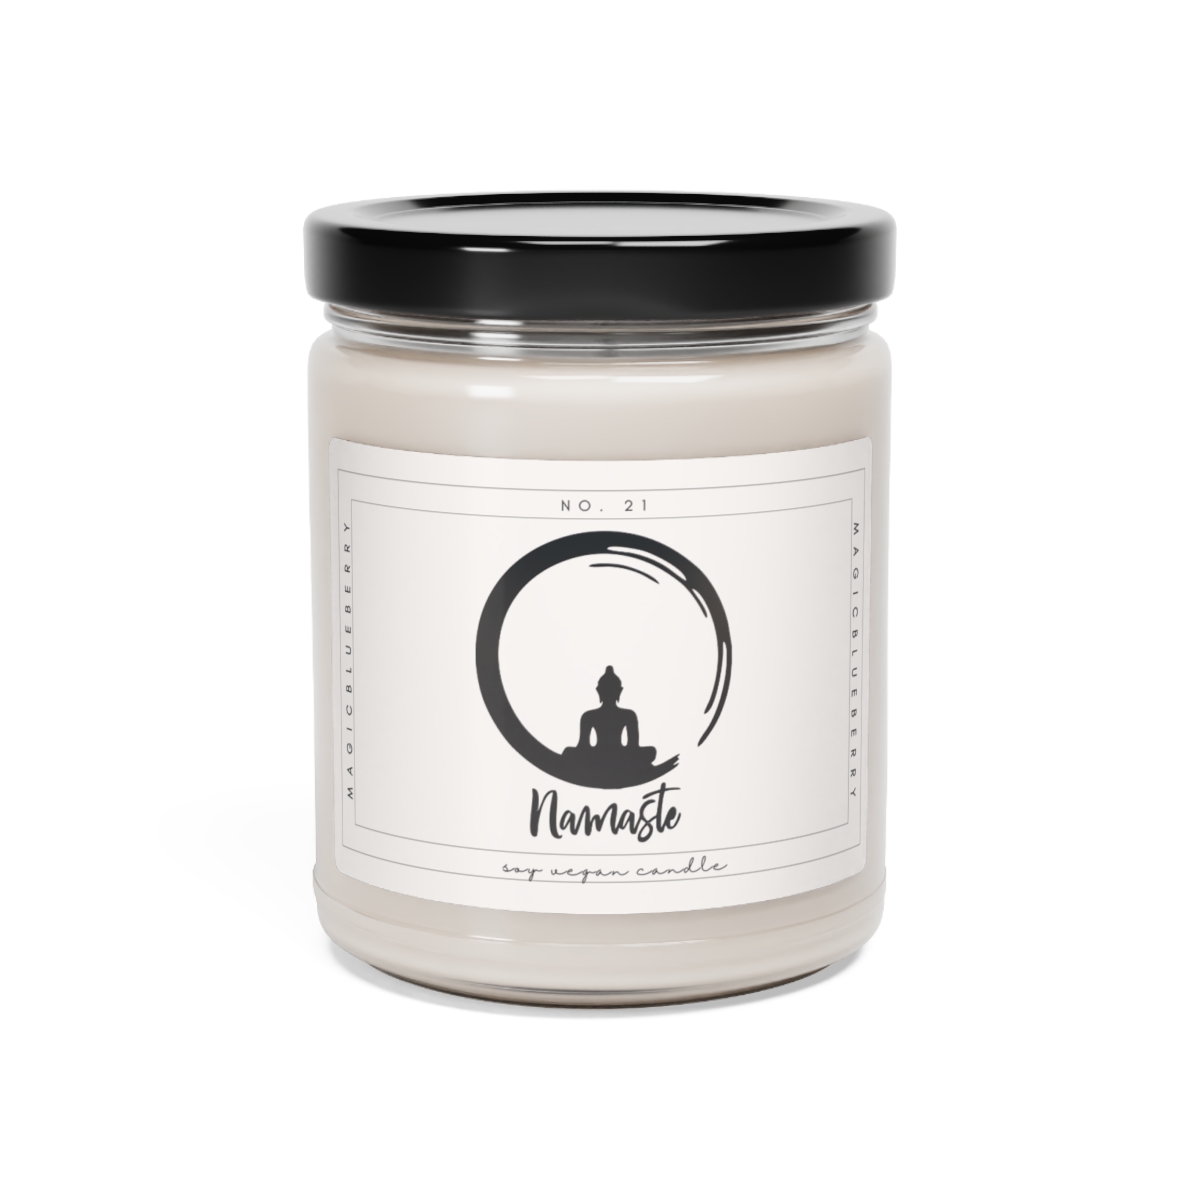 Namaste - Scented Vegan Soy Wax Candle Clear Jar Candle, Spell Candle, Sassy Candle Vegan Candle Cotton Wick Candle Home Deco product thumbnail image